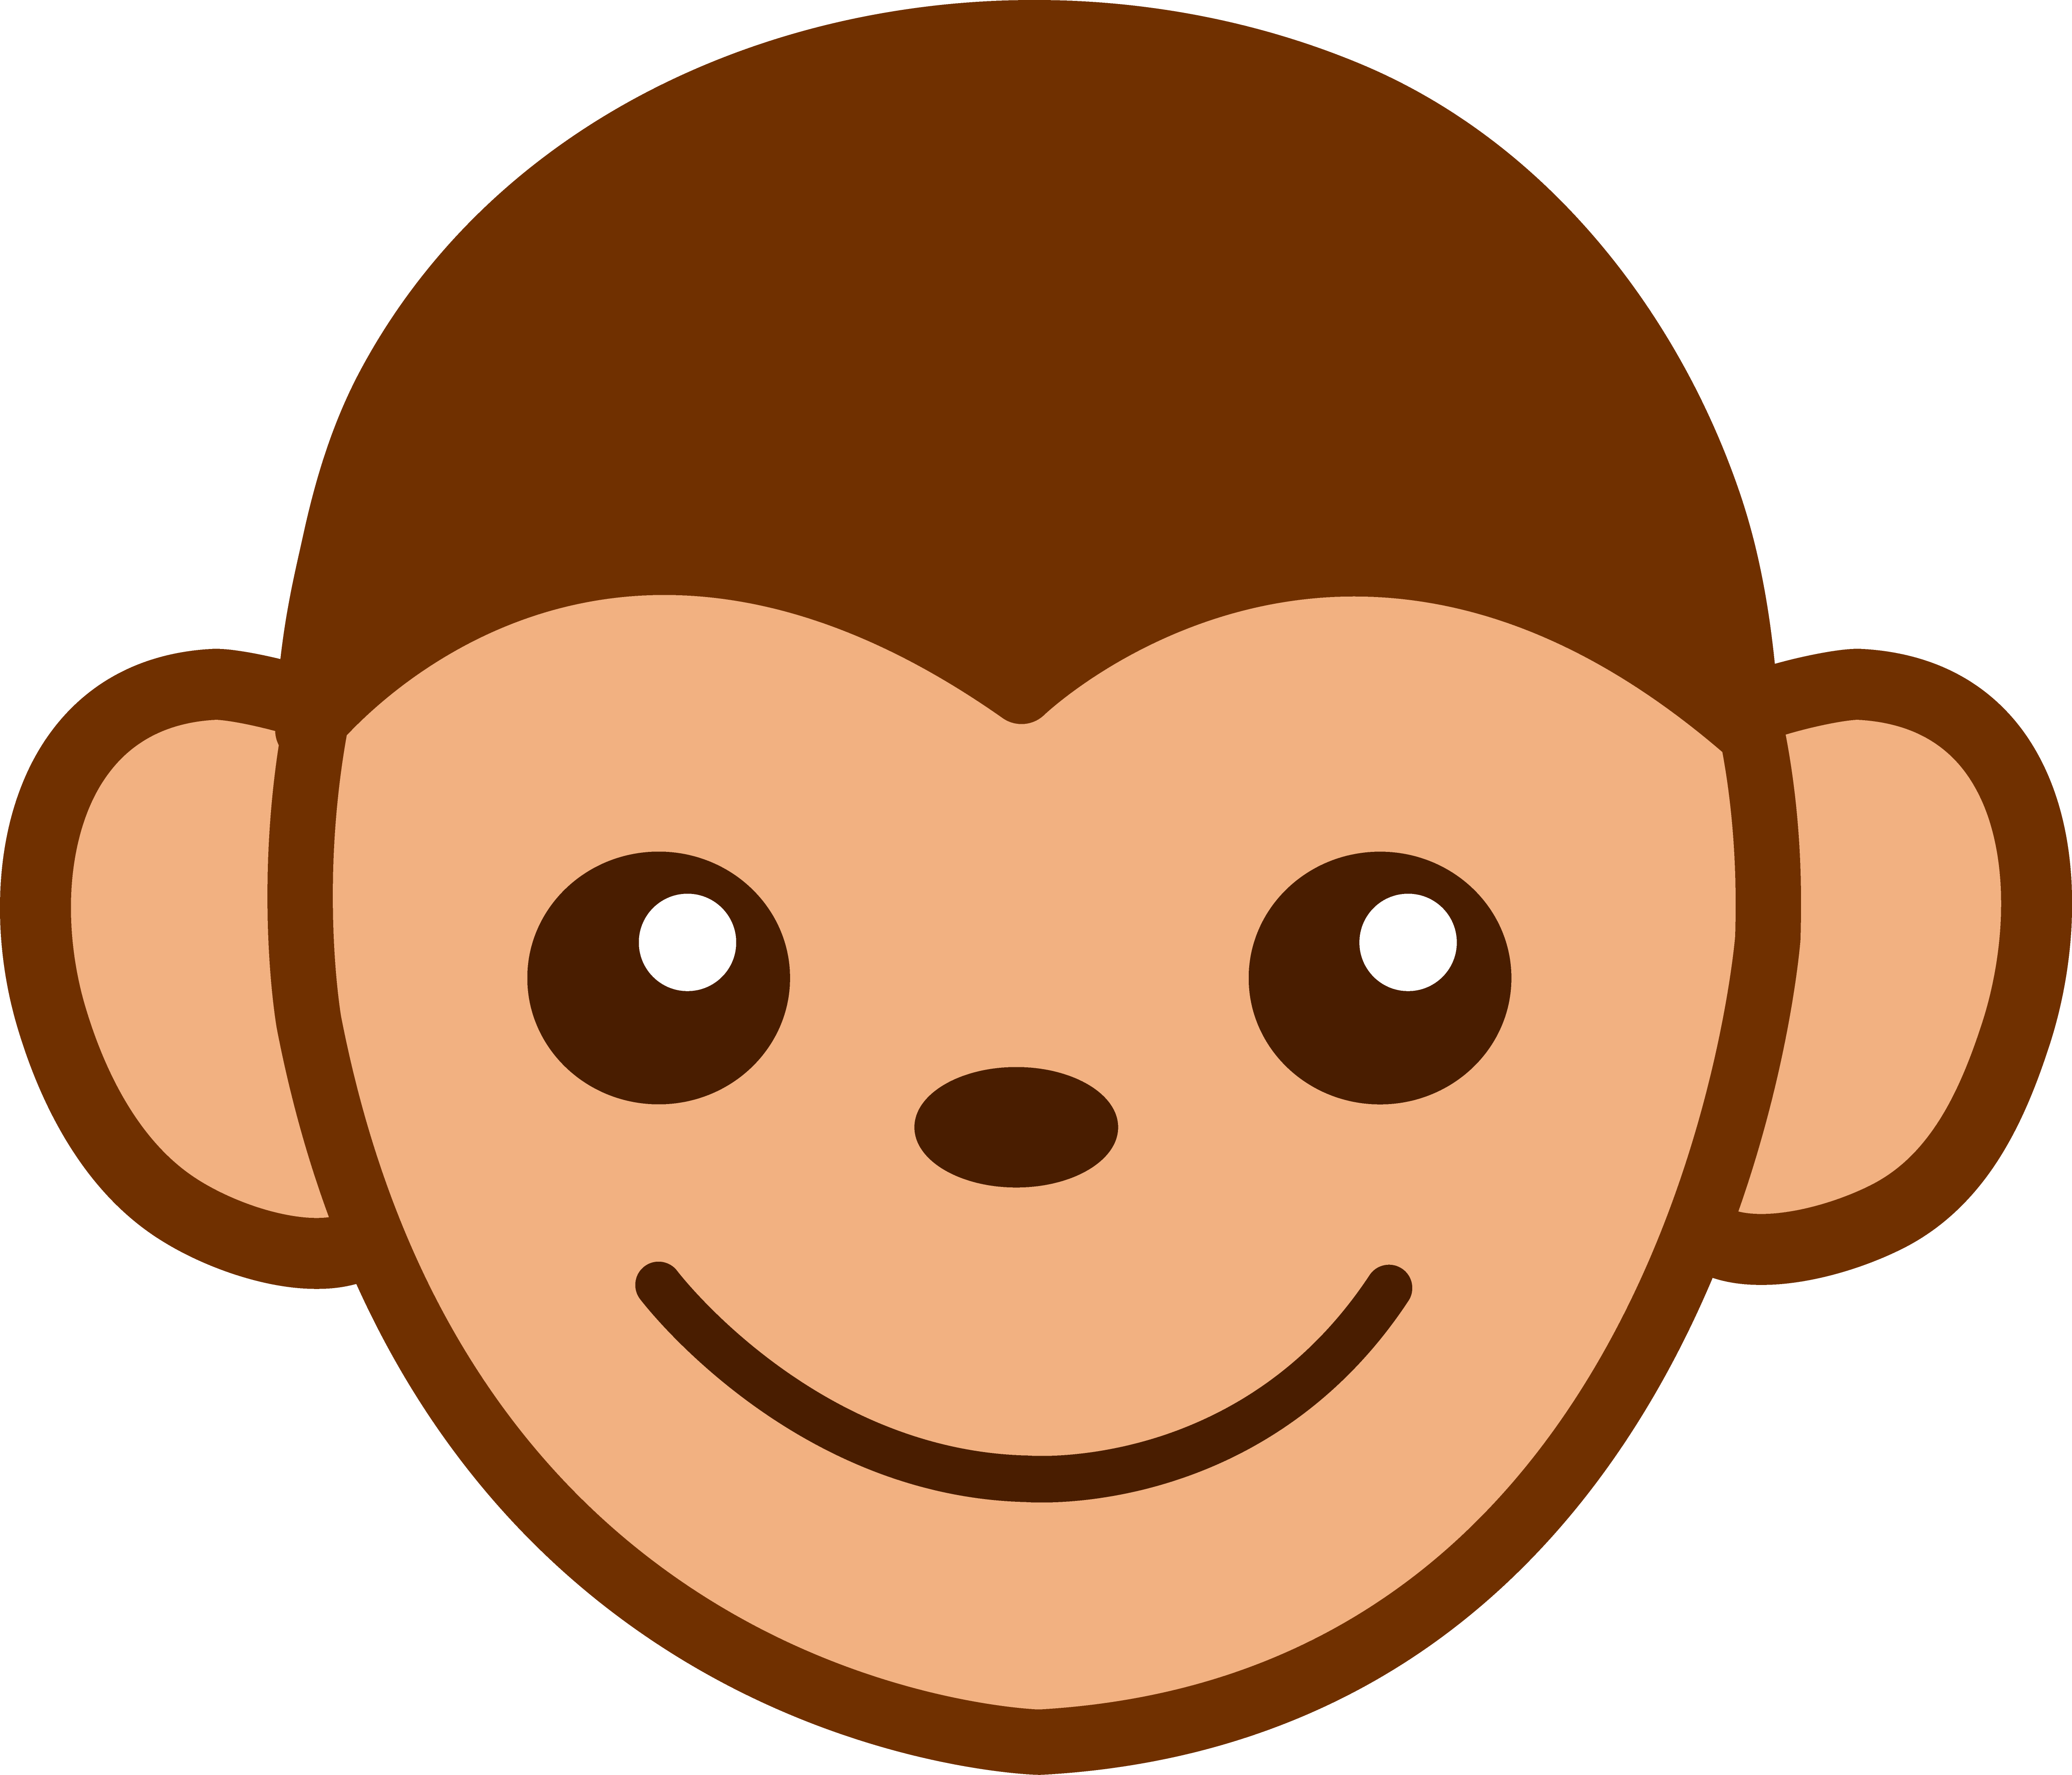 Sad Monkey Face Clipart - Cliparts and Others Art Inspiration